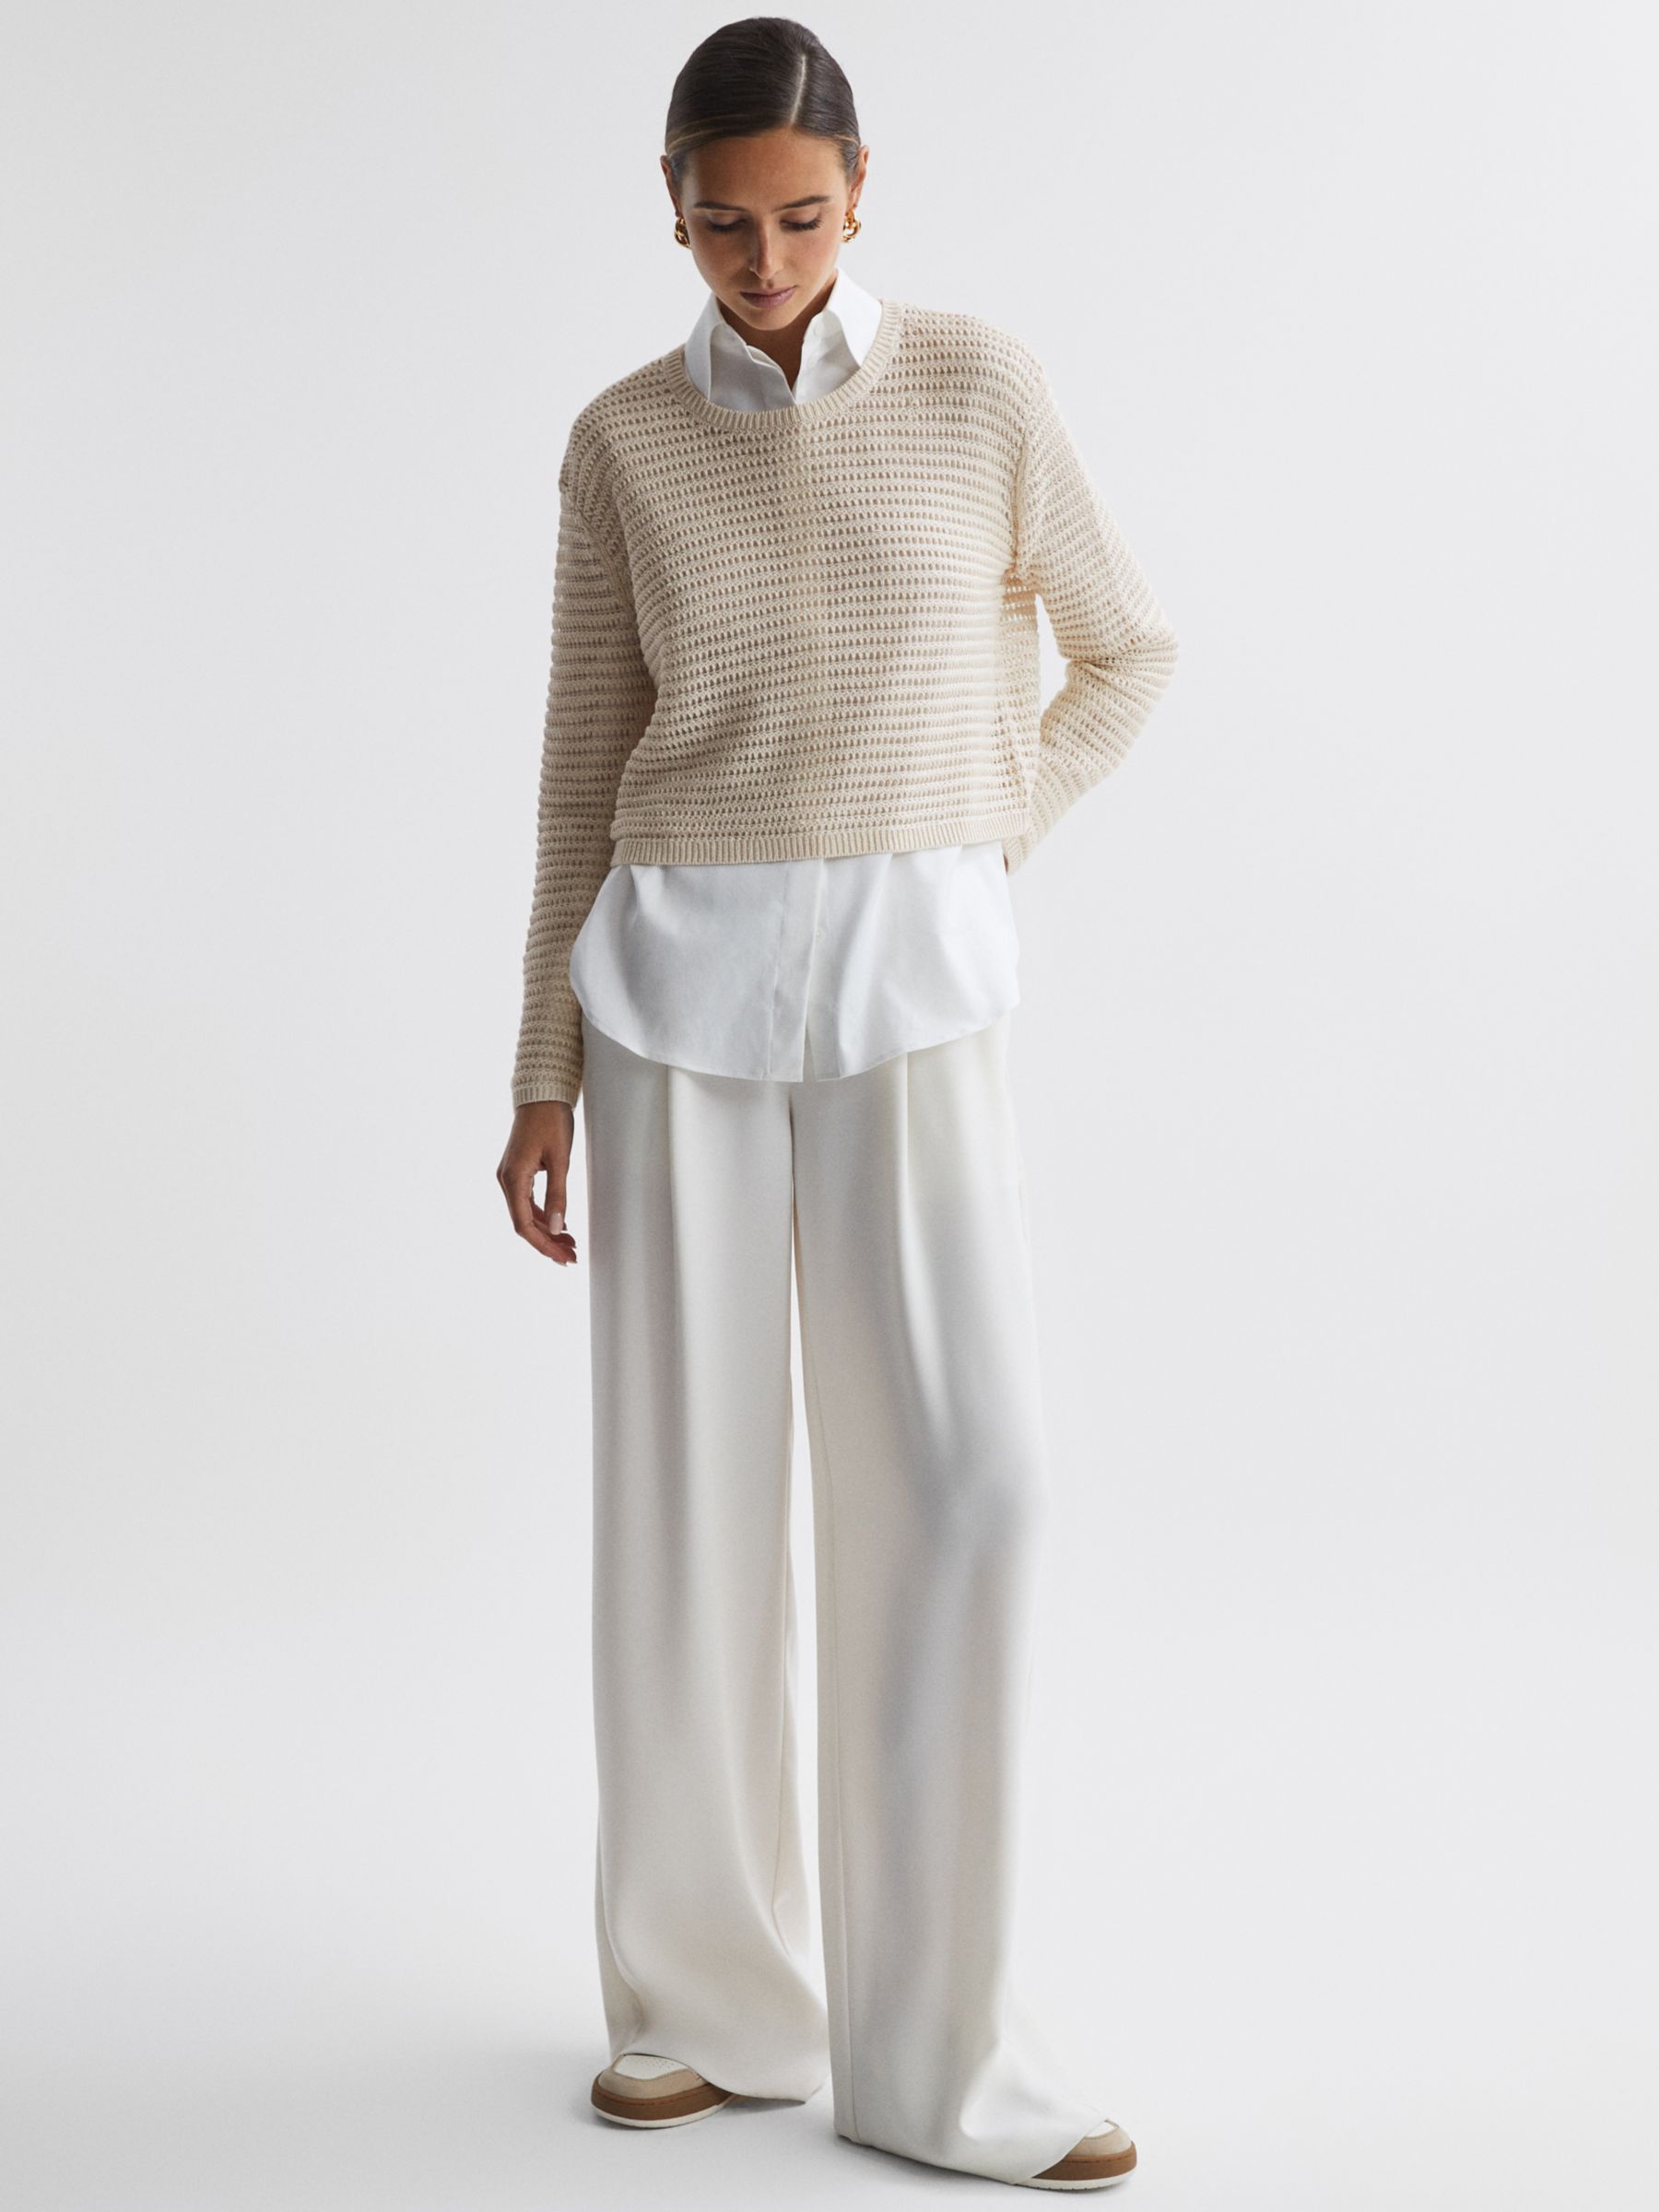 Reiss Avril Open Stitch Crew neck Jumper, Ivory at John Lewis & Partners